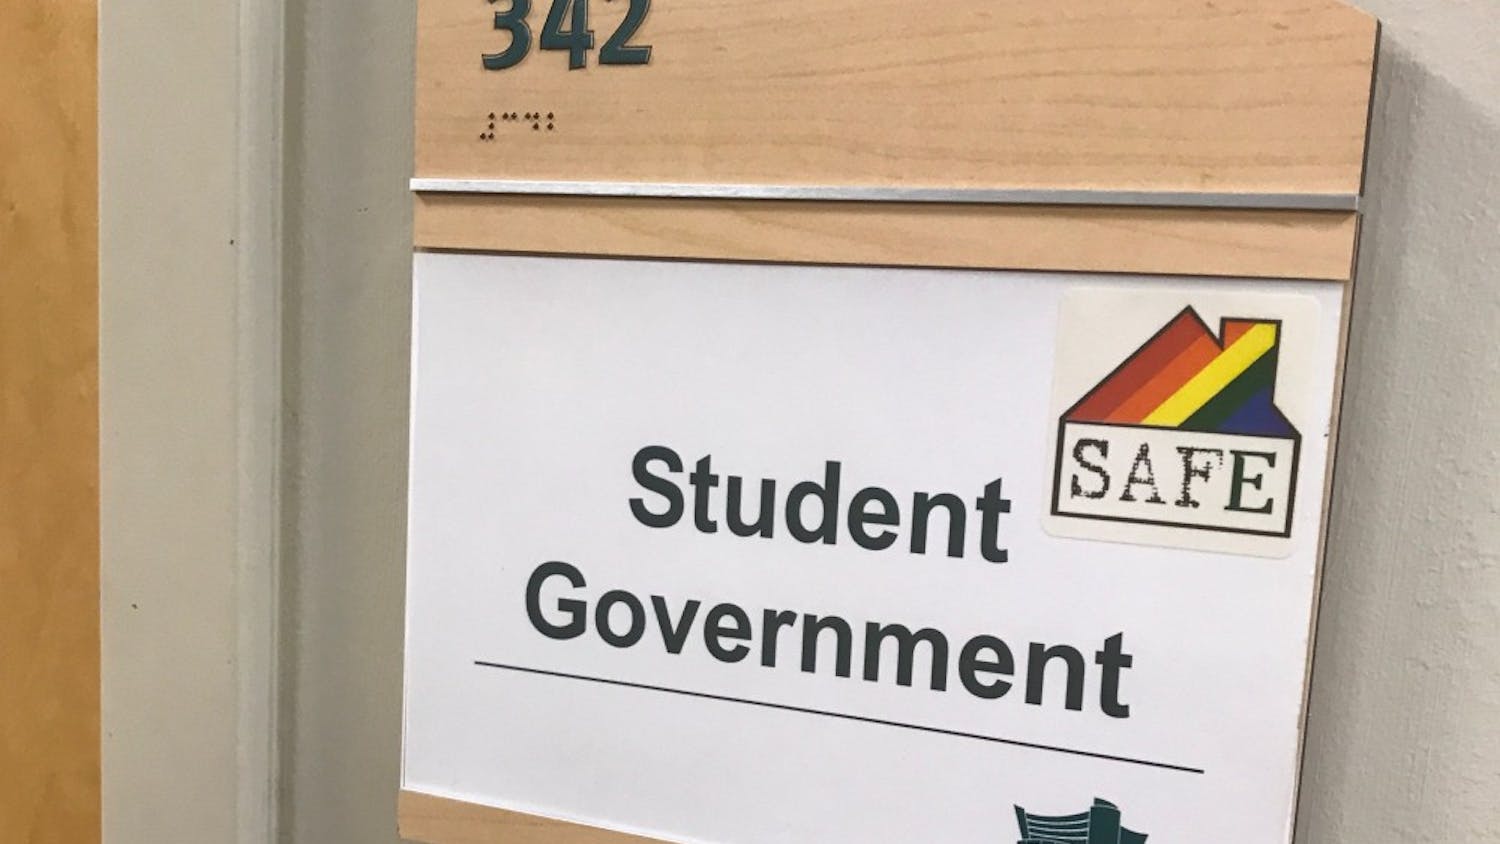 Student Government office sign